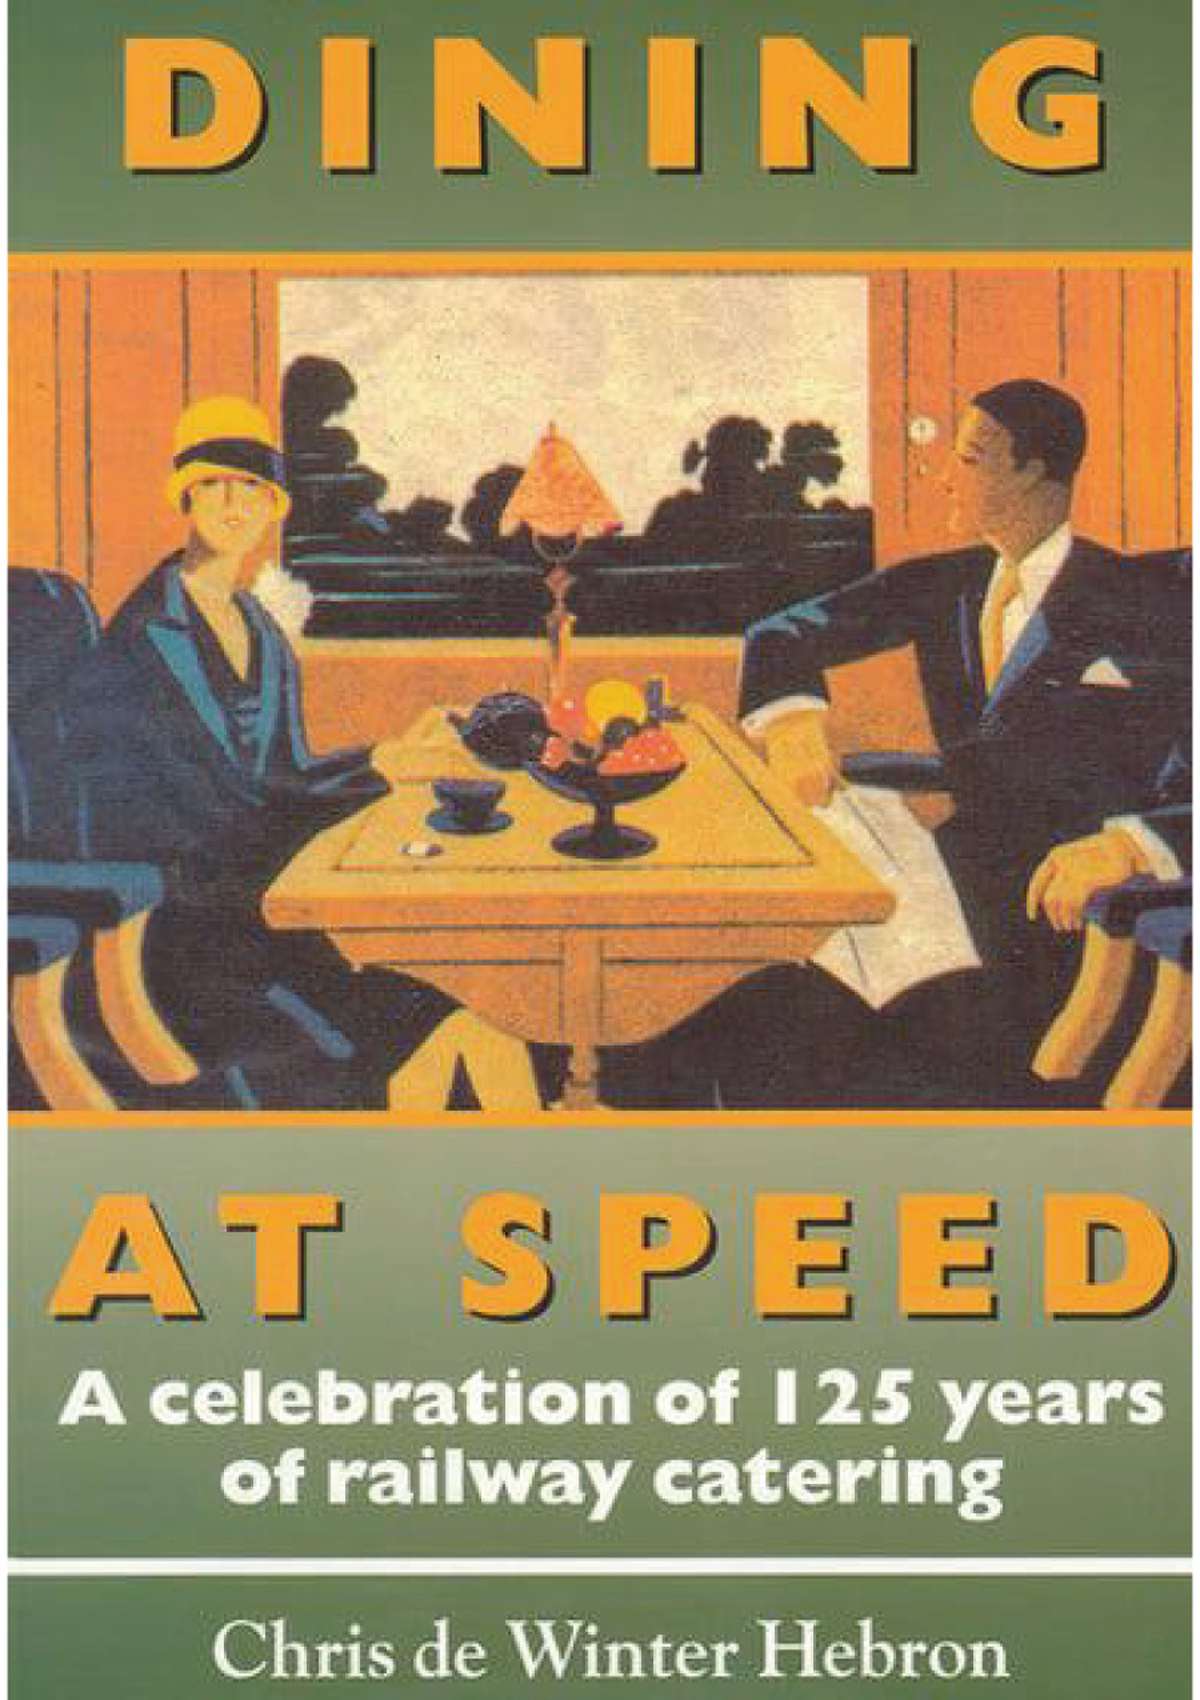 Book - Dining at Speed: A Celebration of 125 Years of Railway Catering